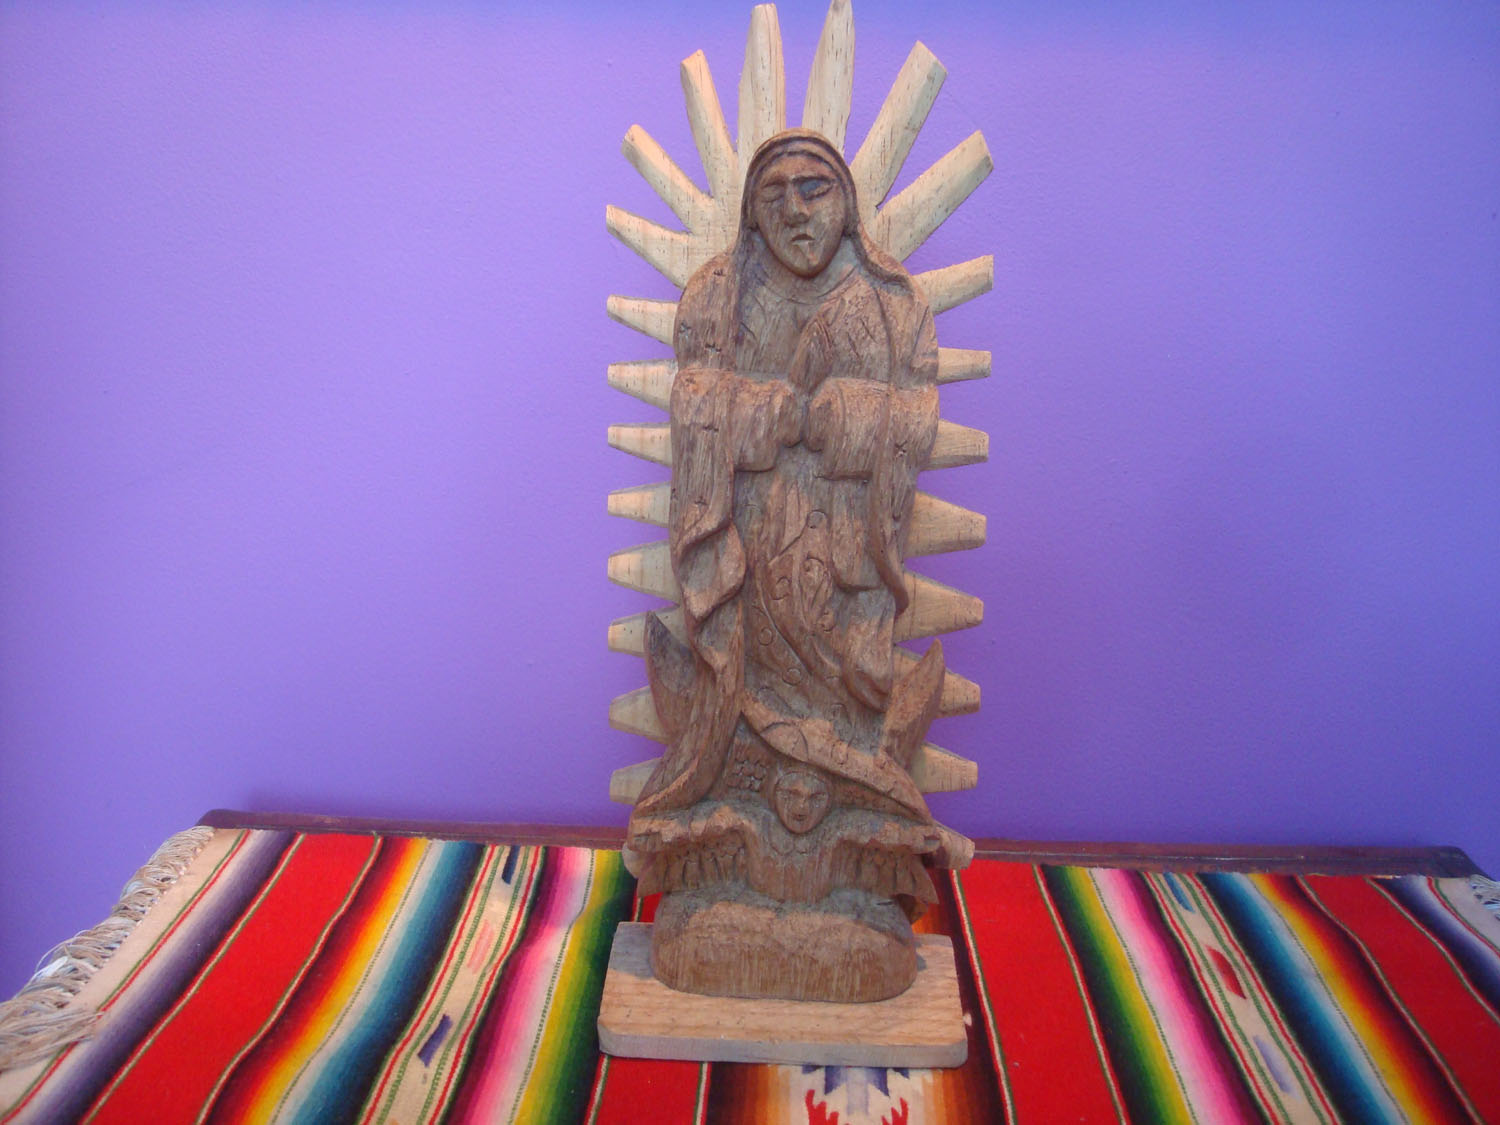 Diorama Black Christ by Mexican Artist A.Torres Kitsch Art – CARAPAN,  MEXICAN ART GALLERY SINCE 1950.